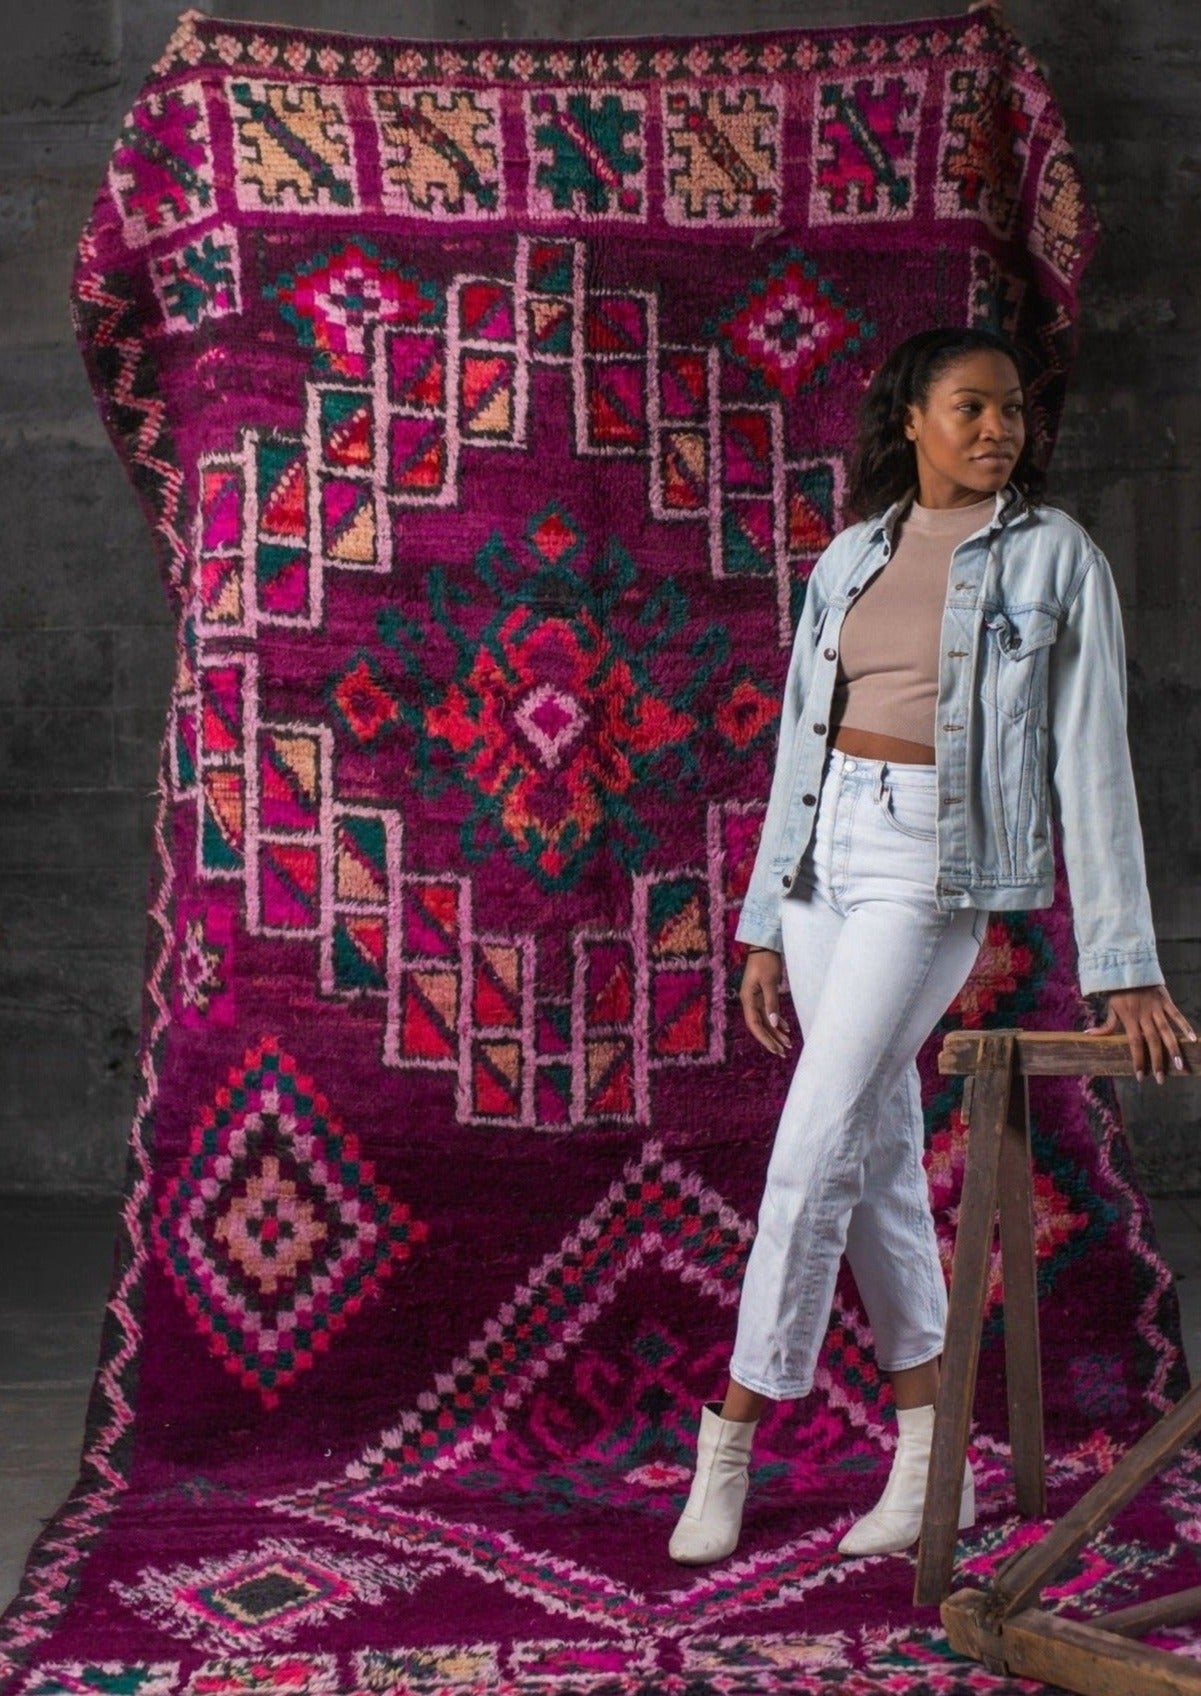 black women empowering female weavers wearing jean jacket and jean combo next to bright colorful rug maroon green orange and pinks on berber symbols in portland oregon